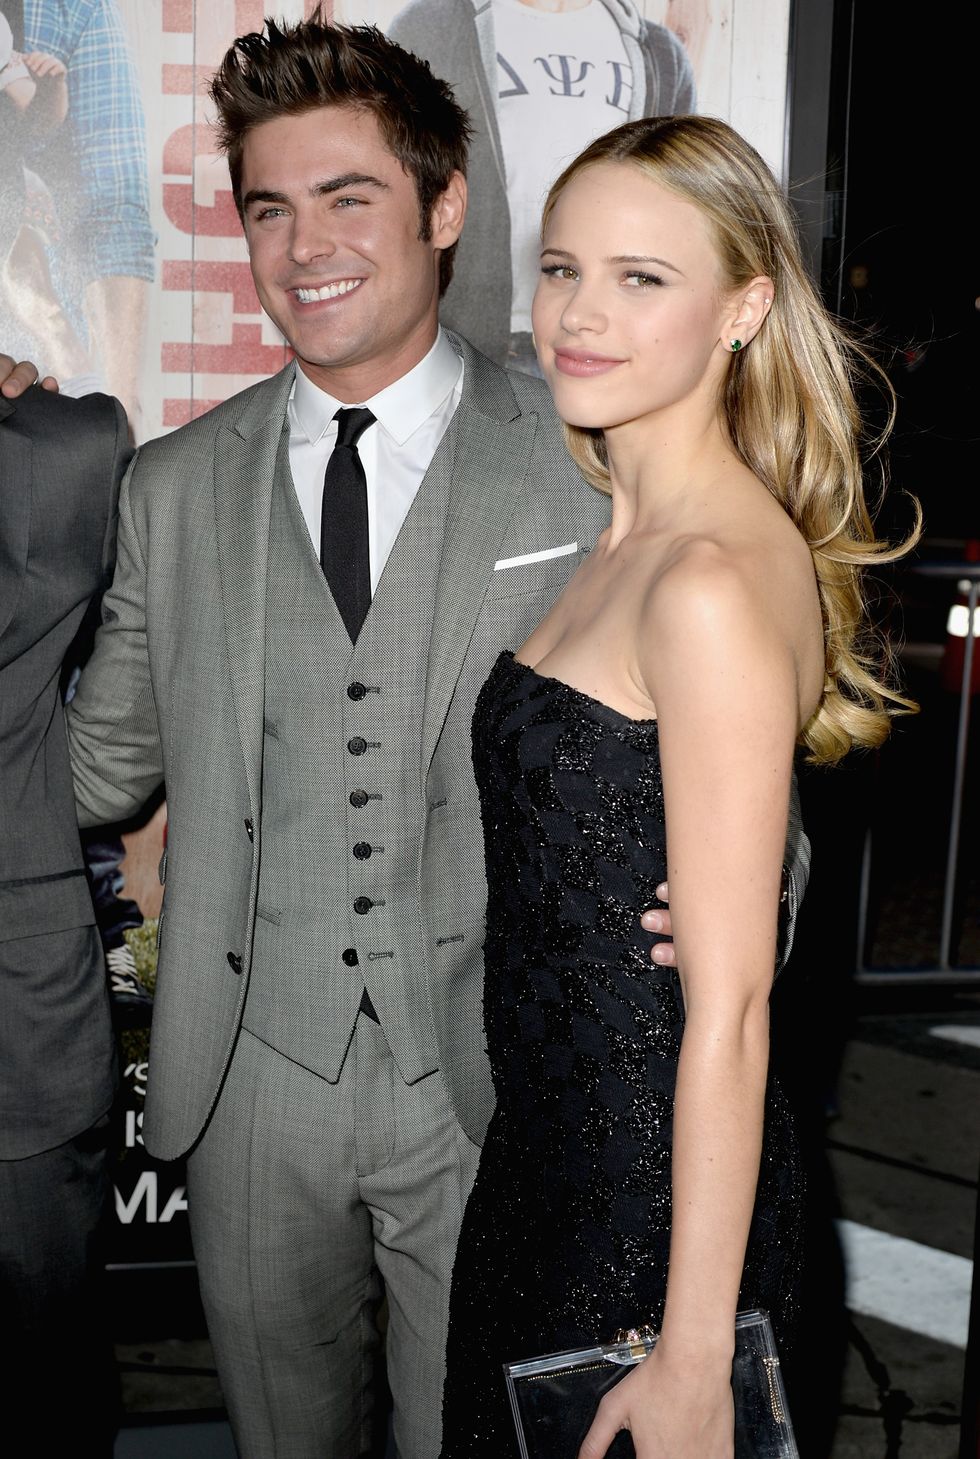 westwood, ca   april 28  actors zac efron l and halston sage attend universal pictures neighbors premiere at regency village theatre on april 28, 2014 in westwood, california  photo by kevin wintergetty images